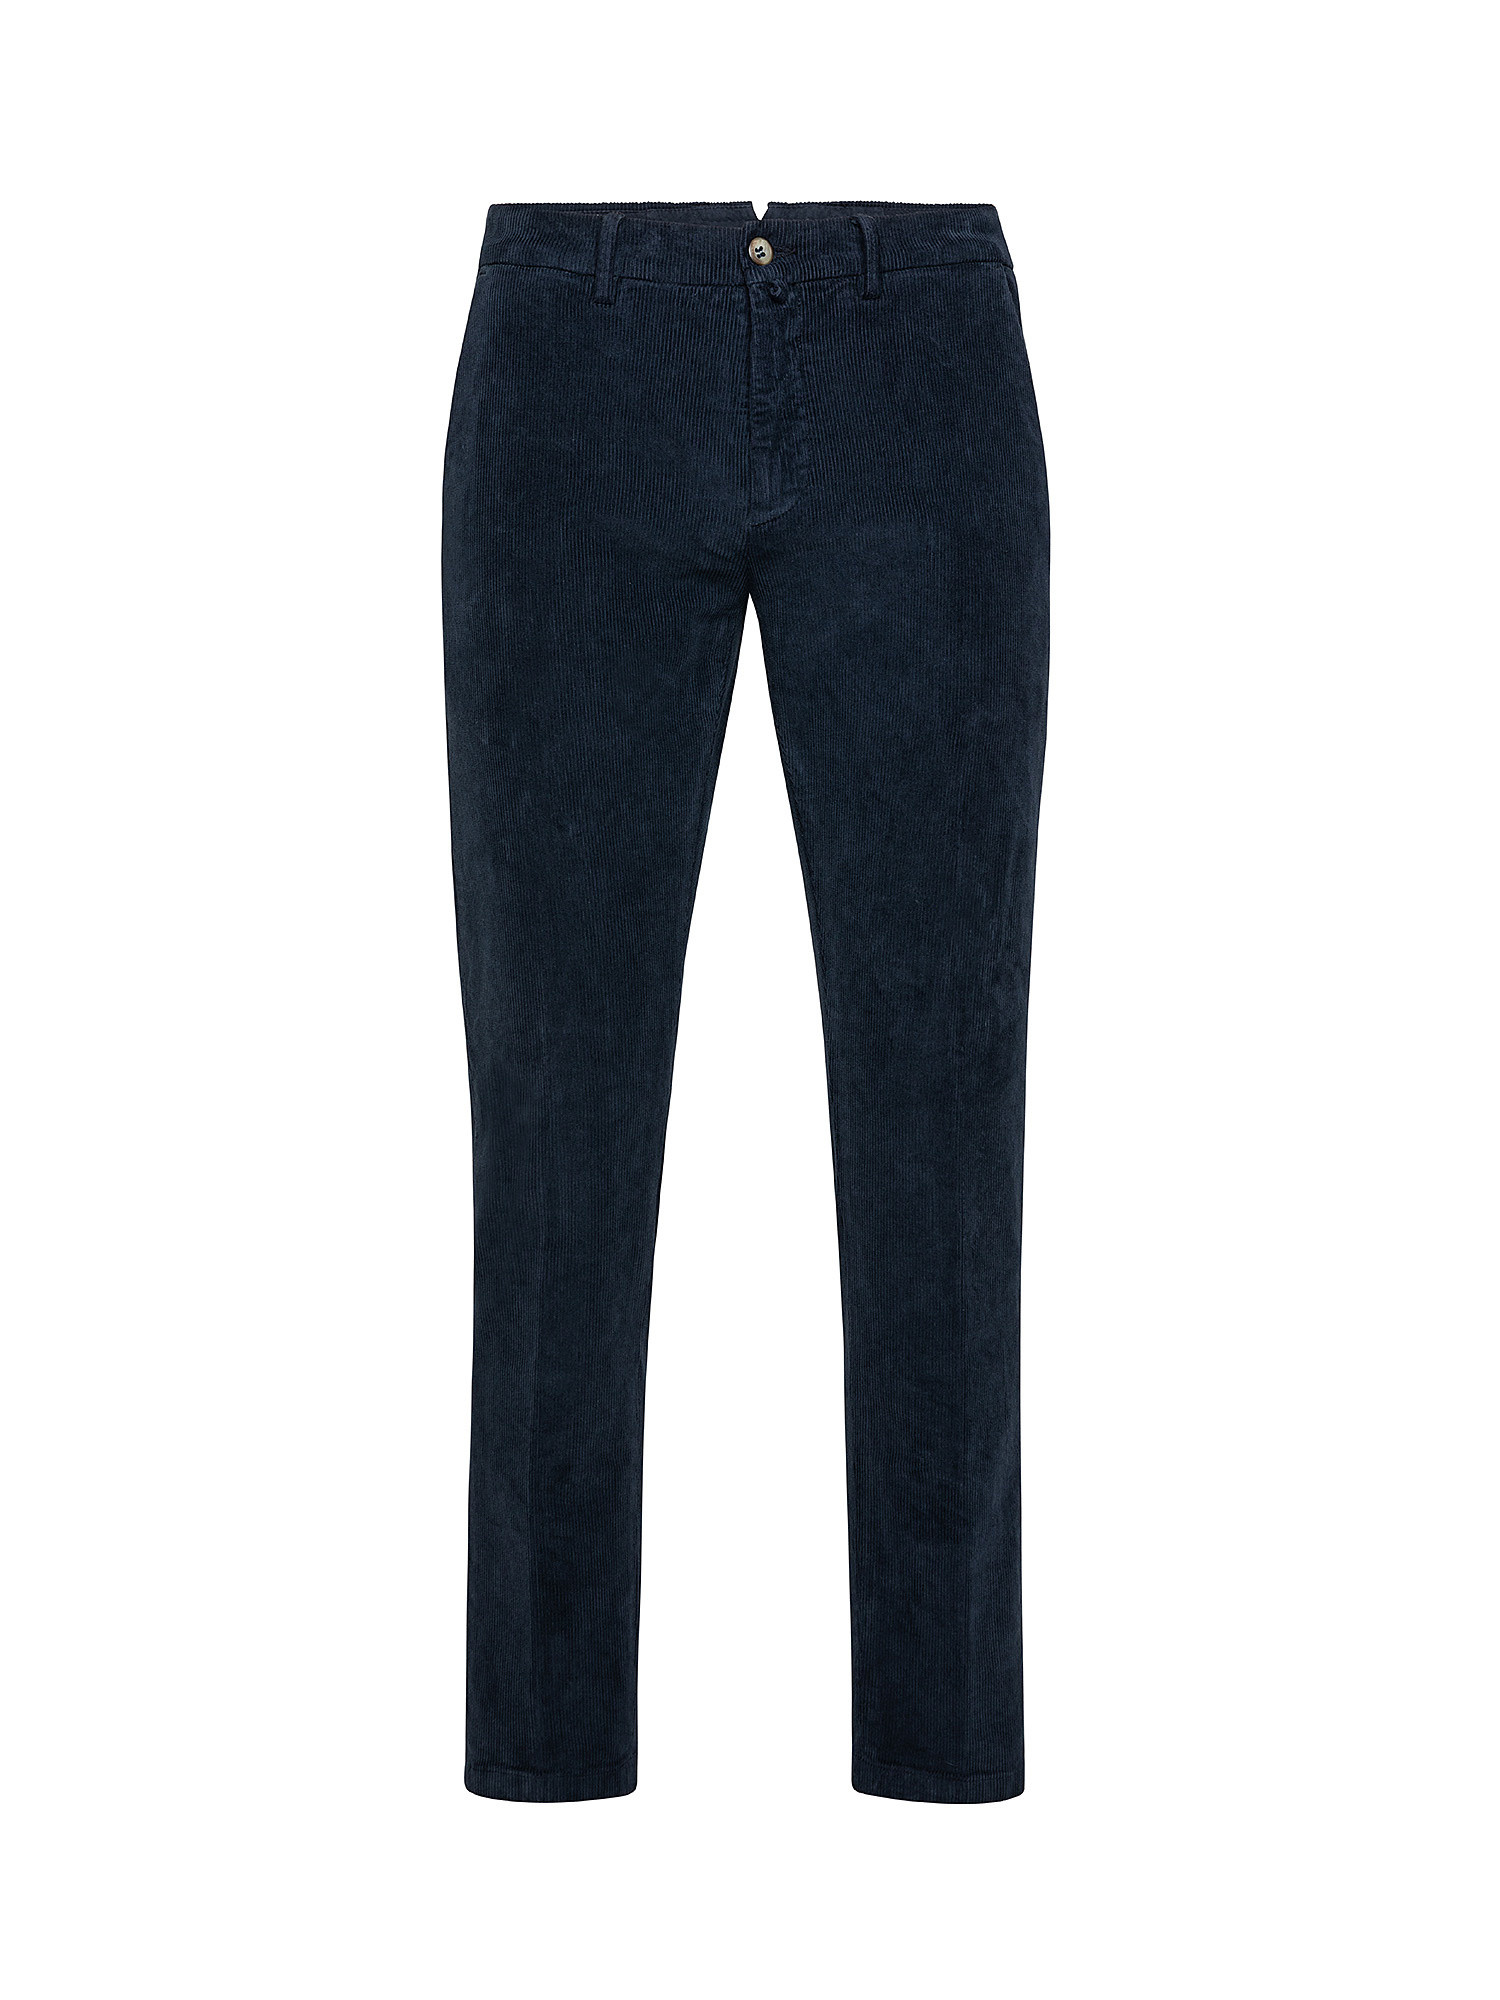 Chino trousers, Blue, large image number 0